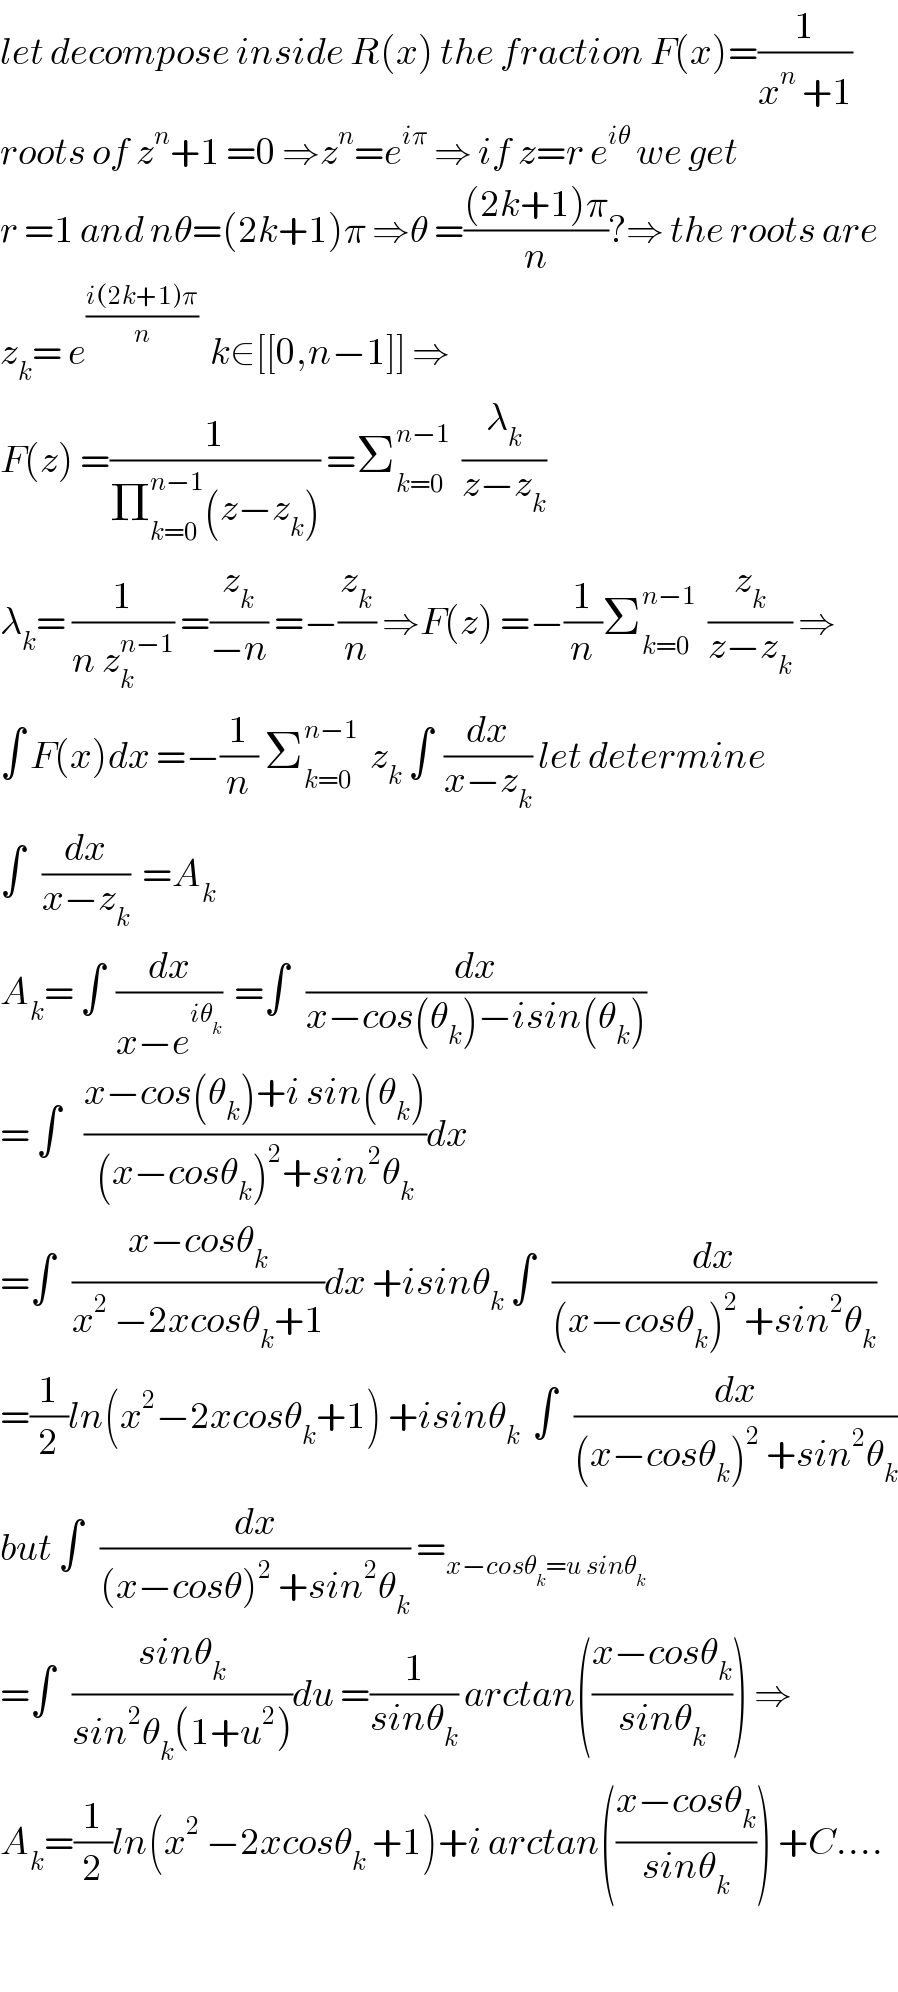 let decompose inside R(x) the fraction F(x)=(1/(x^n  +1))  roots of z^n +1 =0 ⇒z^n =e^(iπ)  ⇒ if z=r e^(iθ)  we get  r =1 and nθ=(2k+1)π ⇒θ =(((2k+1)π)/n)?⇒ the roots are  z_k = e^((i(2k+1)π)/n)   k∈[[0,n−1]] ⇒  F(z) =(1/(Π_(k=0) ^(n−1) (z−z_k ))) =Σ_(k=0) ^(n−1)   (λ_k /(z−z_k ))  λ_k = (1/(n z_k ^(n−1) )) =(z_k /(−n)) =−(z_k /n) ⇒F(z) =−(1/n)Σ_(k=0) ^(n−1)   (z_k /(z−z_k )) ⇒  ∫ F(x)dx =−(1/n) Σ_(k=0) ^(n−1)   z_k  ∫  (dx/(x−z_k )) let determine  ∫   (dx/(x−z_k ))  =A_k   A_k = ∫  (dx/(x−e^(iθ_k ) ))  =∫   (dx/(x−cos(θ_k )−isin(θ_k )))  = ∫    ((x−cos(θ_k )+i sin(θ_k ))/((x−cosθ_k )^2 +sin^2 θ_k ))dx  =∫   ((x−cosθ_k )/(x^2  −2xcosθ_k +1))dx +isinθ_k  ∫   (dx/((x−cosθ_k )^2  +sin^2 θ_k ))  =(1/2)ln(x^2 −2xcosθ_k +1) +isinθ_k   ∫   (dx/((x−cosθ_k )^2  +sin^2 θ_k ))  but ∫   (dx/((x−cosθ)^2  +sin^2 θ_k )) =_(x−cosθ_k =u sinθ_k )   =∫   ((sinθ_k )/(sin^2 θ_k (1+u^2 )))du =(1/(sinθ_k )) arctan(((x−cosθ_k )/(sinθ_k ))) ⇒  A_k =(1/2)ln(x^2  −2xcosθ_k  +1)+i arctan(((x−cosθ_k )/(sinθ_k ))) +C....    